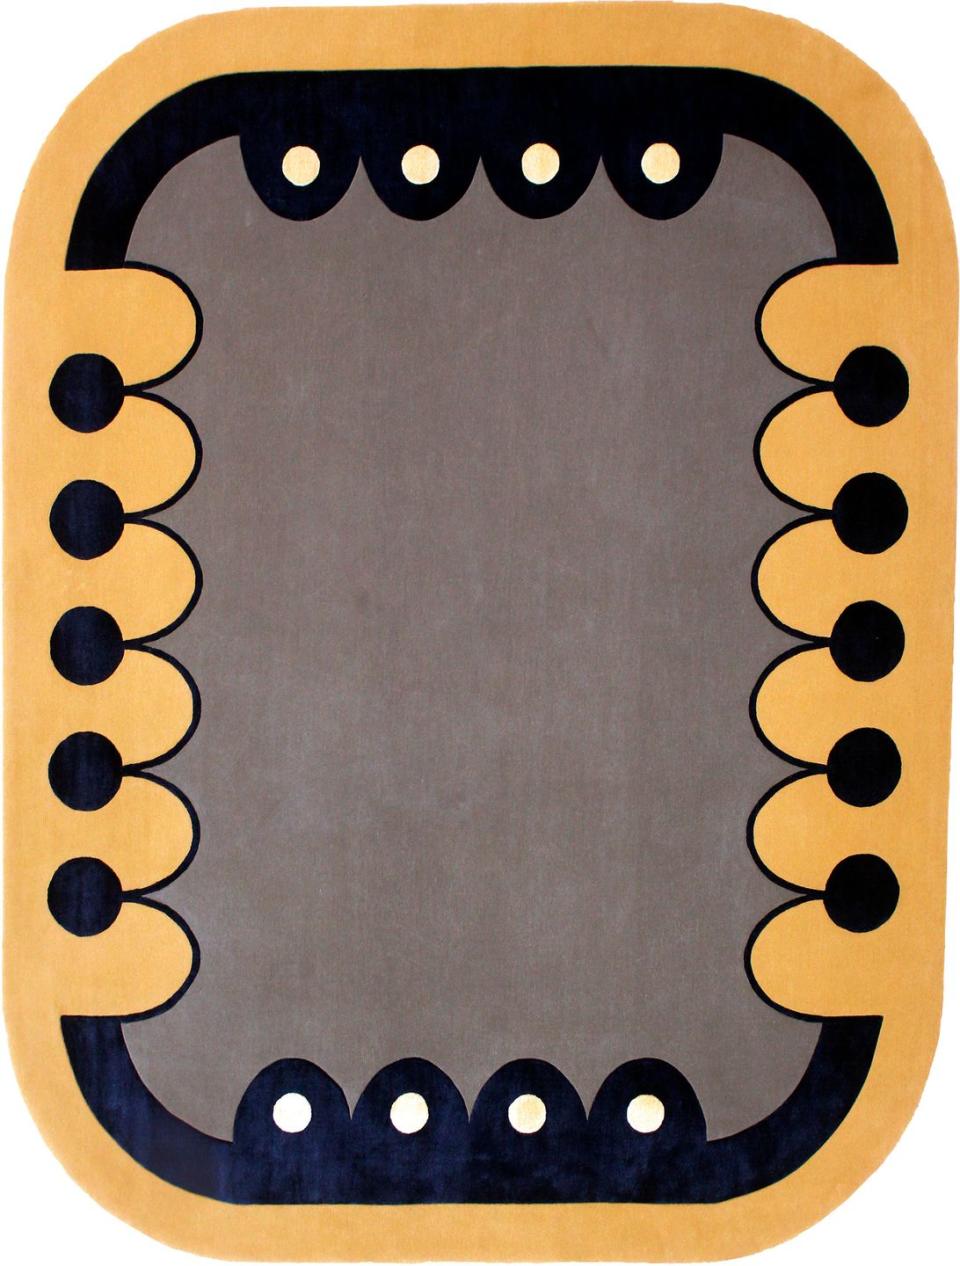 sargeant pepper looking rug in gold border with black accents and a grayish brown interior